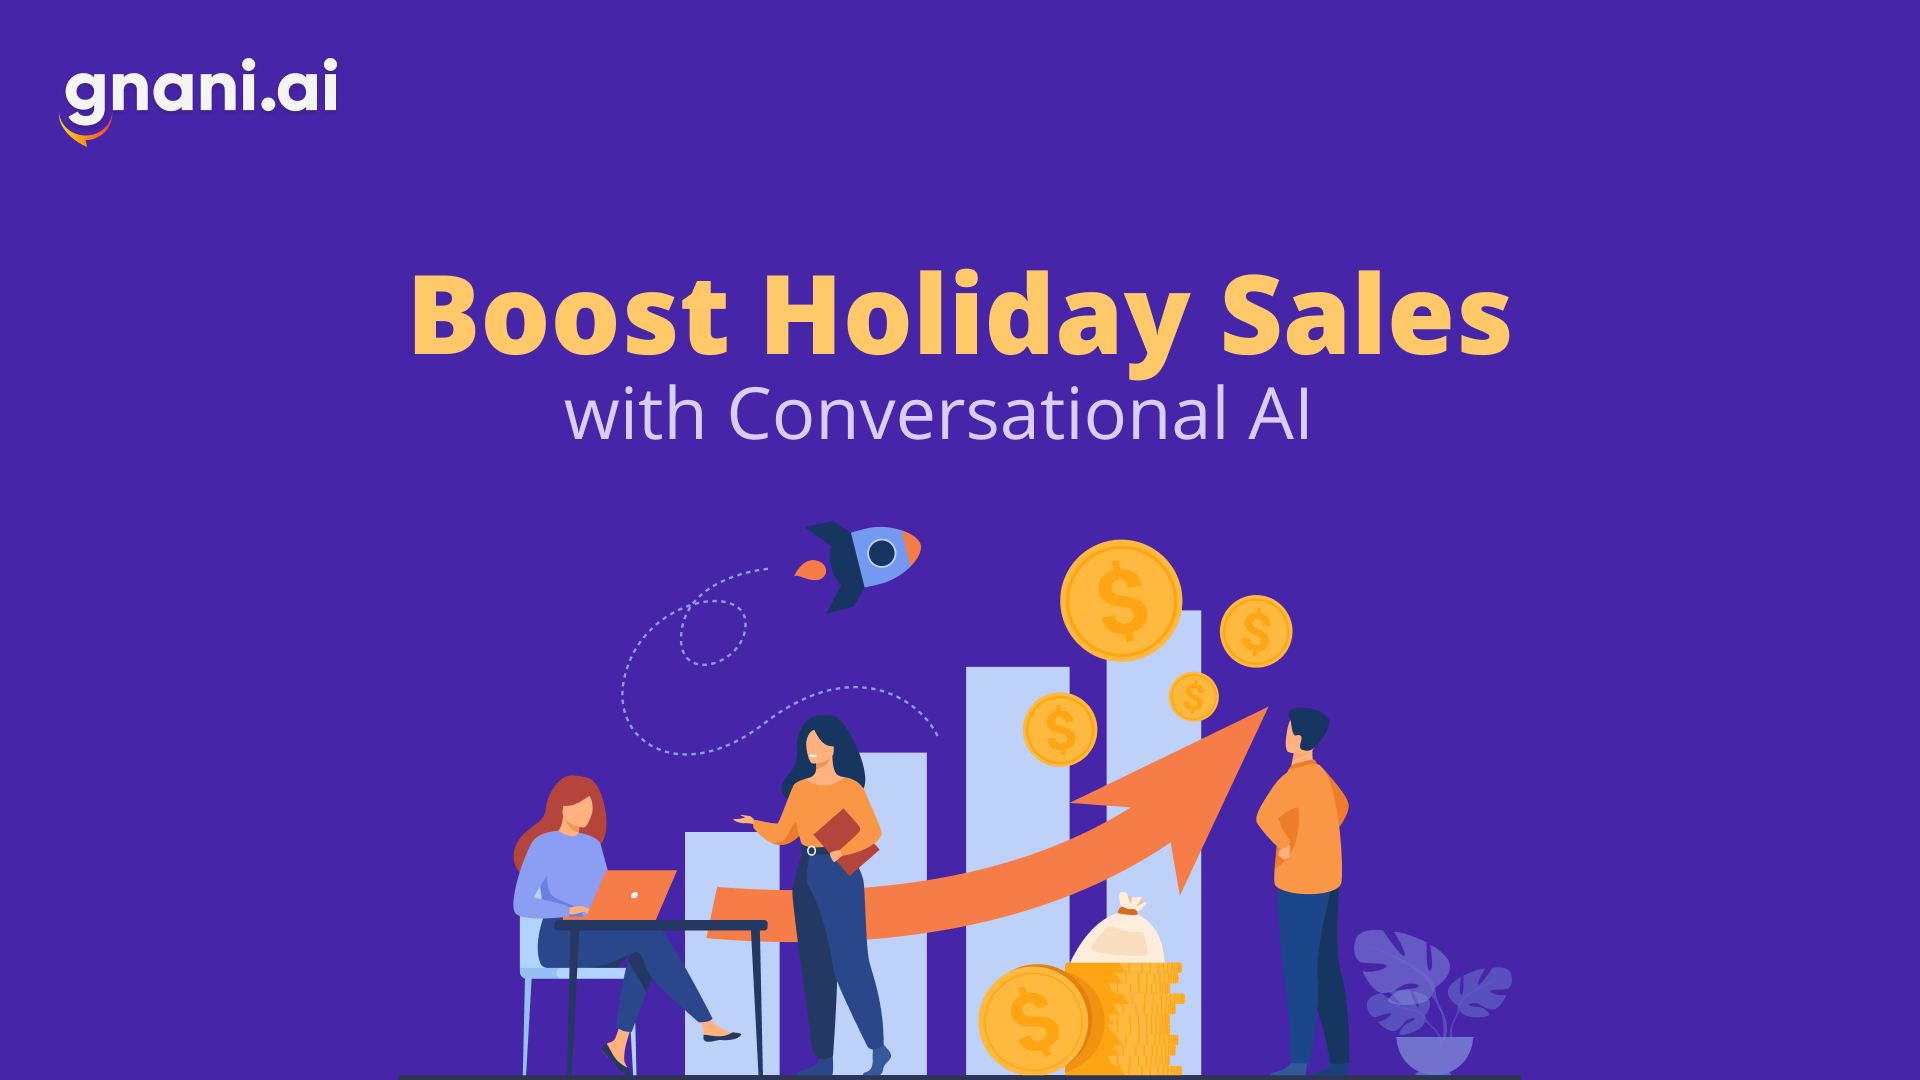 boost holiday sales with conversational ai featured image